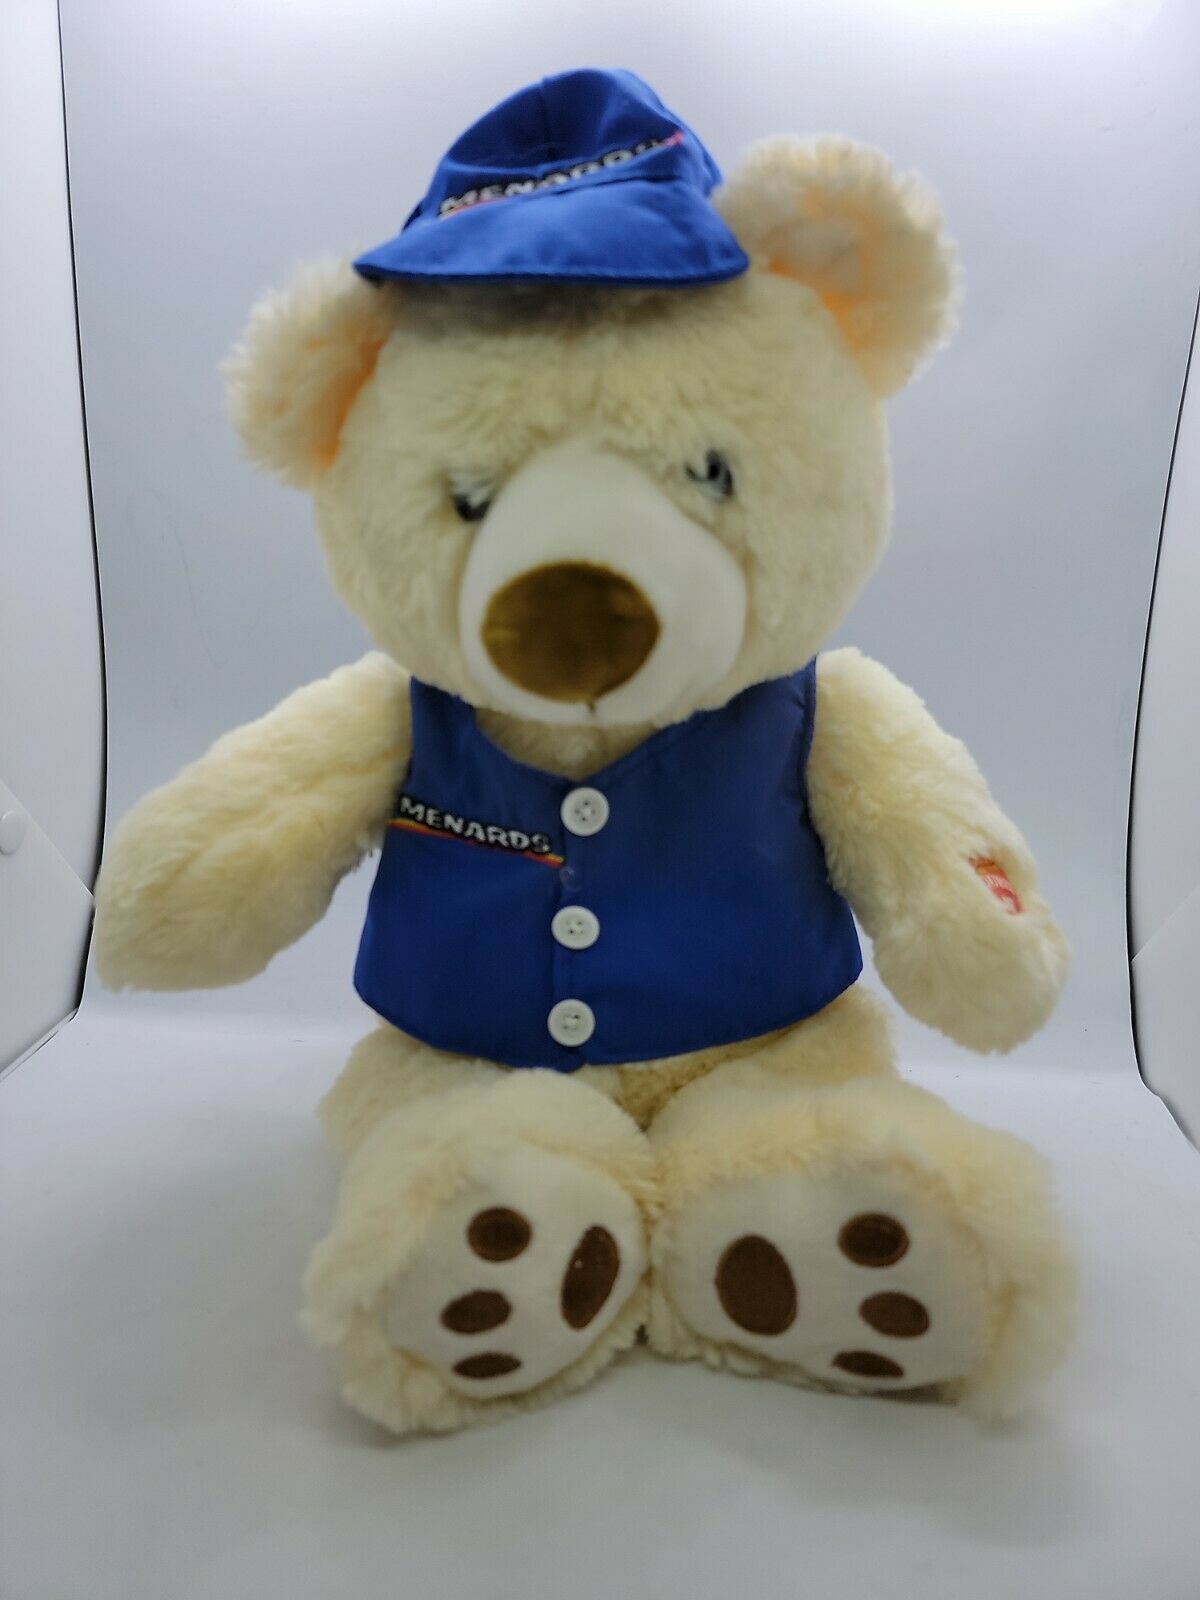 Menards Save Big Money Singing Teddy Bear Vest And Hat 15 Inches Plush Video